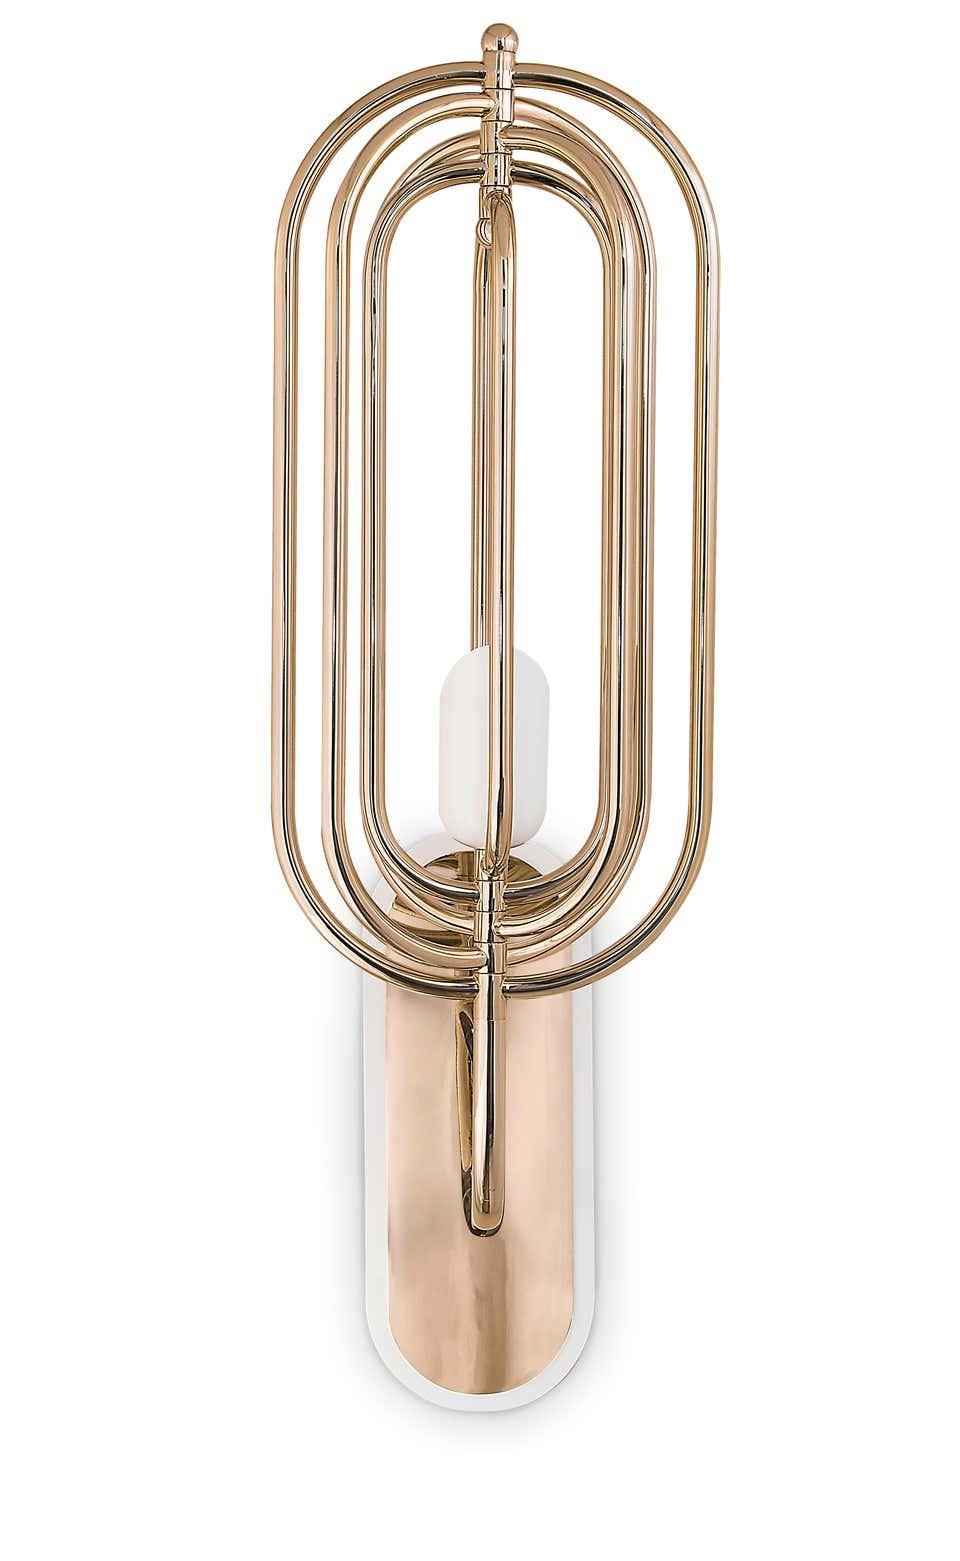 Wall light features a small lamp shade made in aluminium lacquered a matte white. Its structure is 100% handmade in brass with a gold-plated finish, adding an elegant and sophisticated touch to this unique wall sconce lighting. For this interior